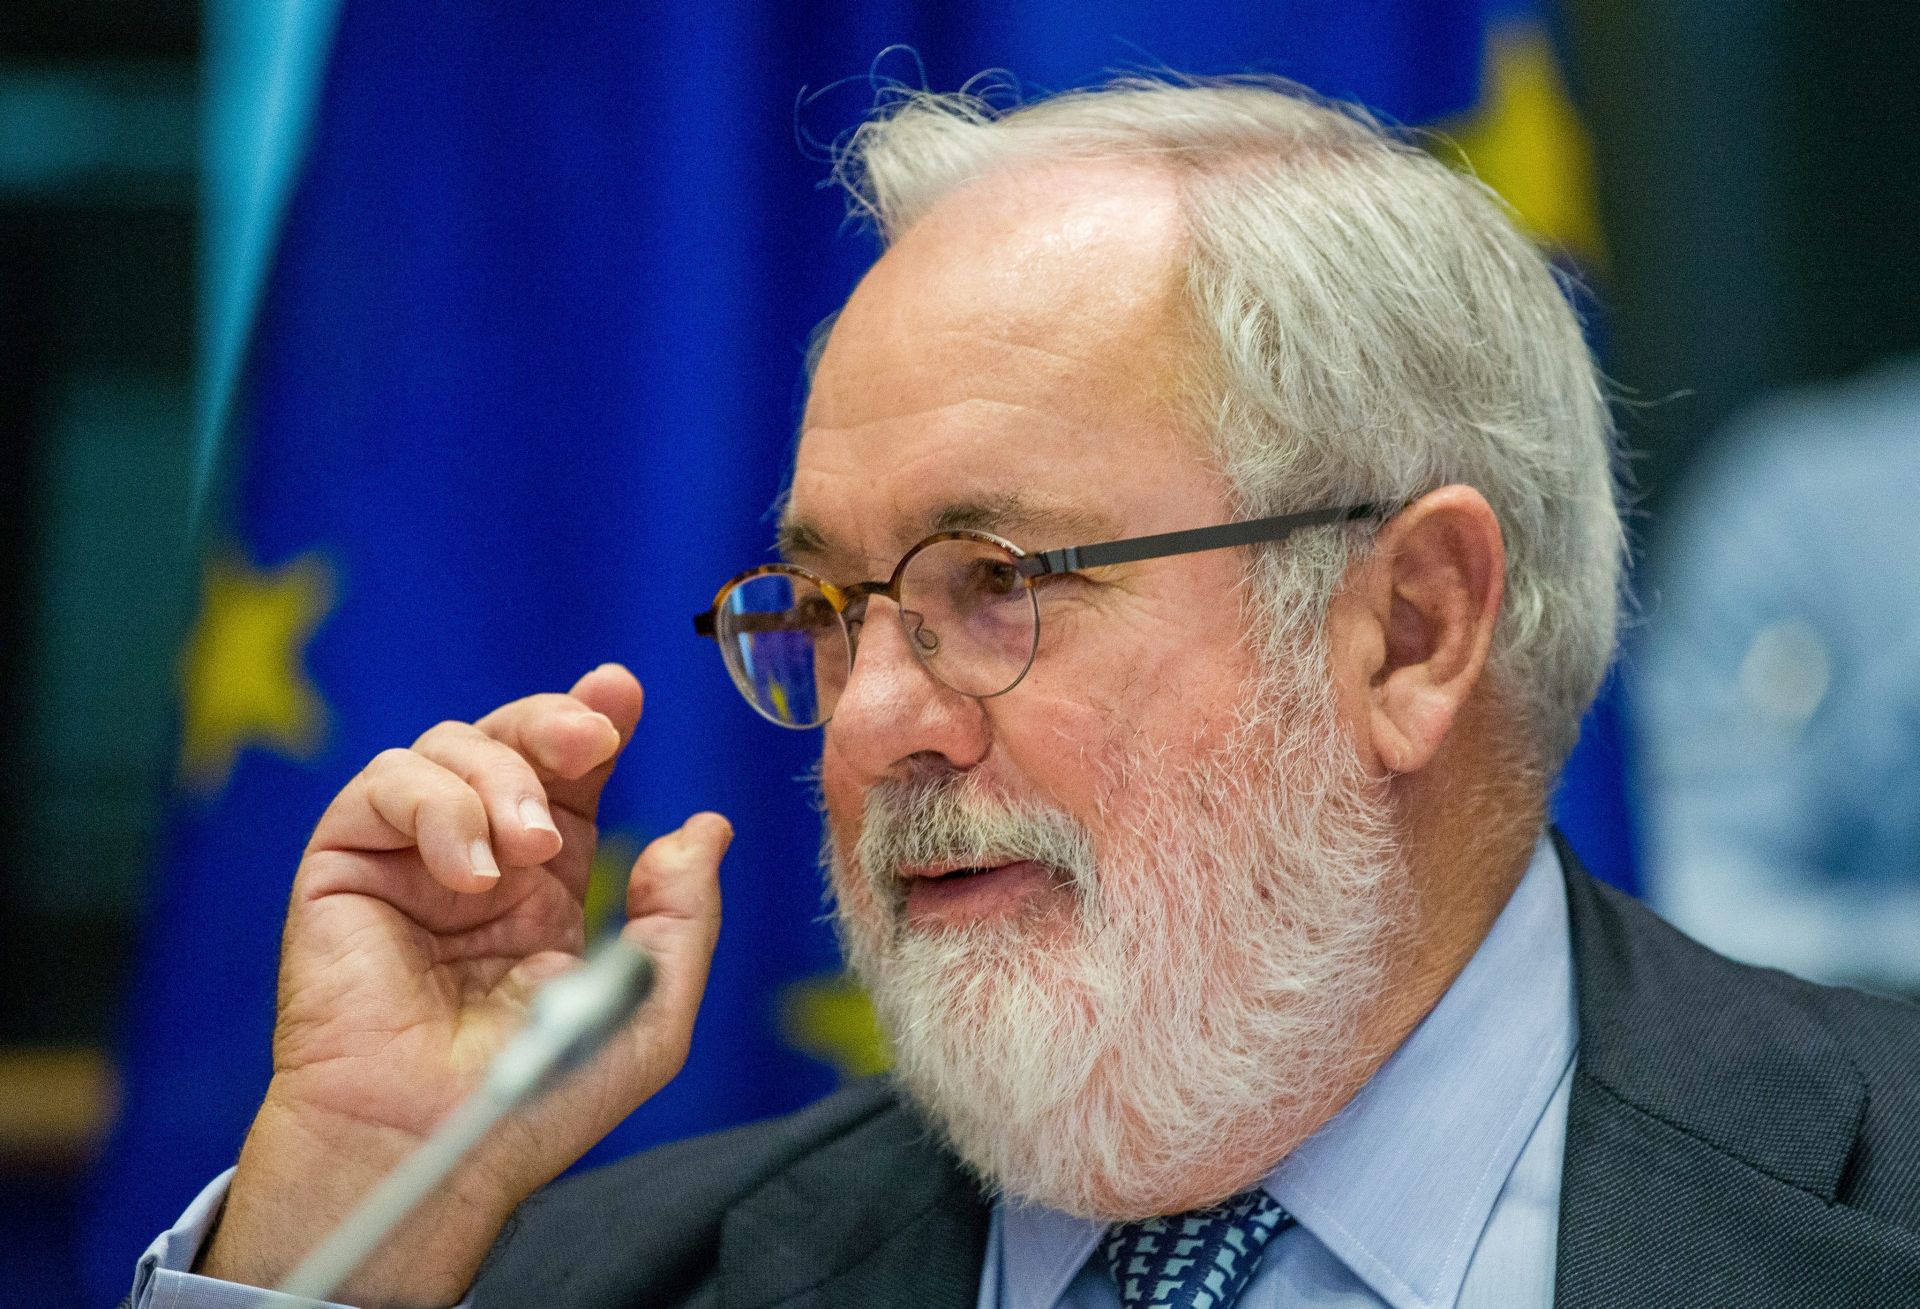 epa05557059 European Commissioner for Climate Action and Energy, Miguel Arias Canete during a hearing in front of Committee on Industry, Research and Energy at the European Parliament, in Brussels, Belgium, 26 September 2016.  EPA/STEPHANIE LECOCQ